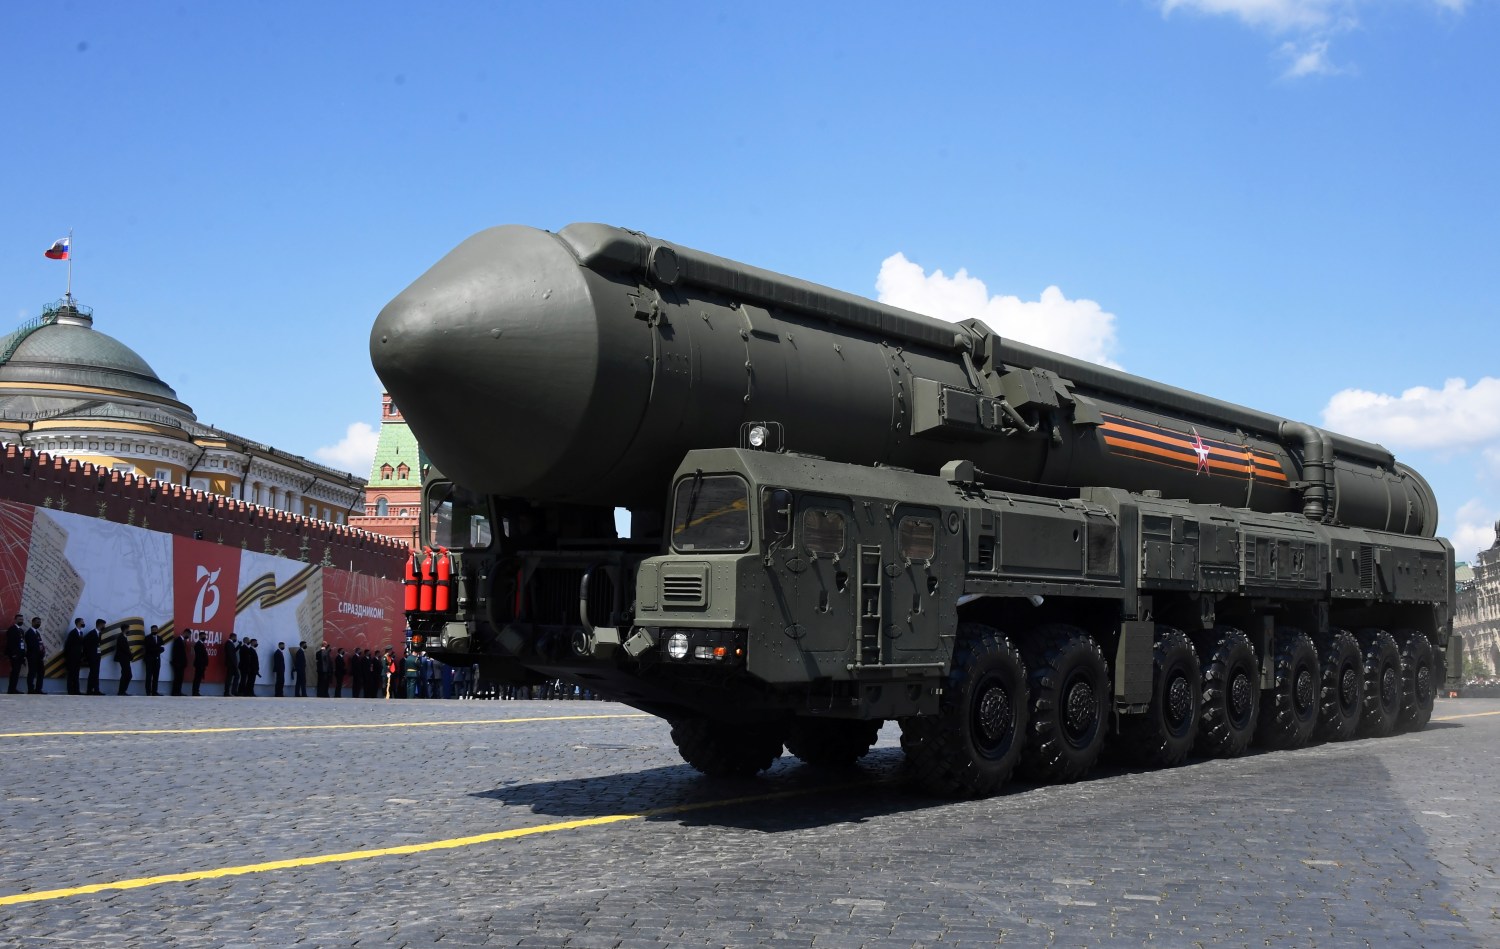 A Russian Yars intercontinental ballistic missile system drives during the Victory Day Parade in Red Square in Moscow, Russia, June 24, 2020. The military parade, marking the 75th anniversary of the victory over Nazi Germany in World War Two, was scheduled for May 9 but postponed due to the outbreak of the coronavirus disease (COVID-19). Host photo agency/Iliya Pitalev via REUTERS